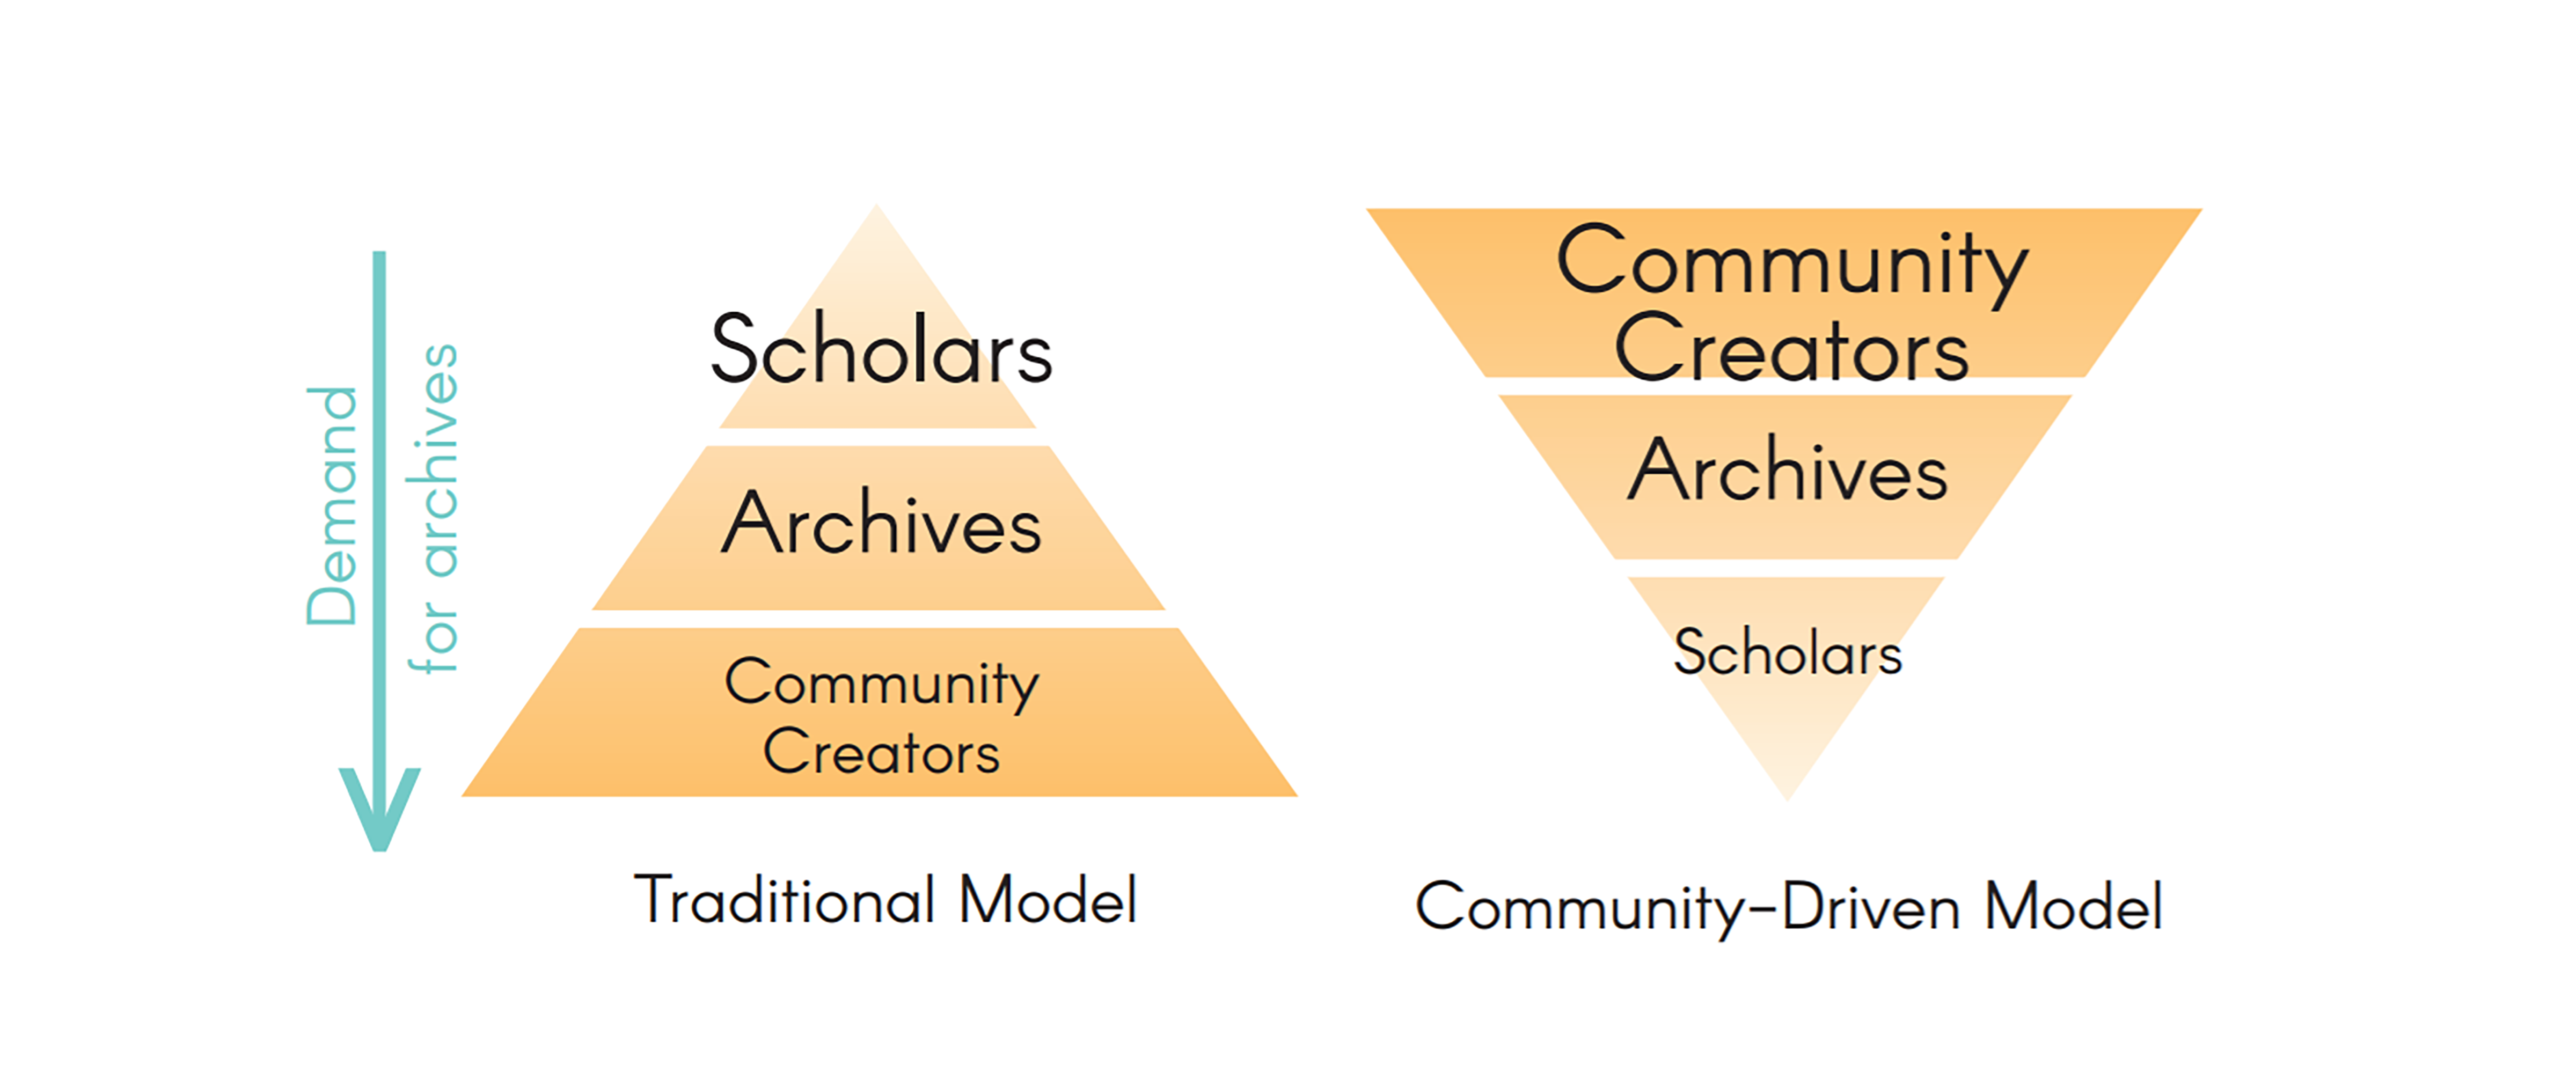 Two triangles side by side, one inverted, demontrating the different audience focuses of the traditional and the community-driven archival models. Scholars are shown at the top of the pyramid in the traditional model, while community creators are shown at the top of the inverted triangle in the community-driven archival model. 